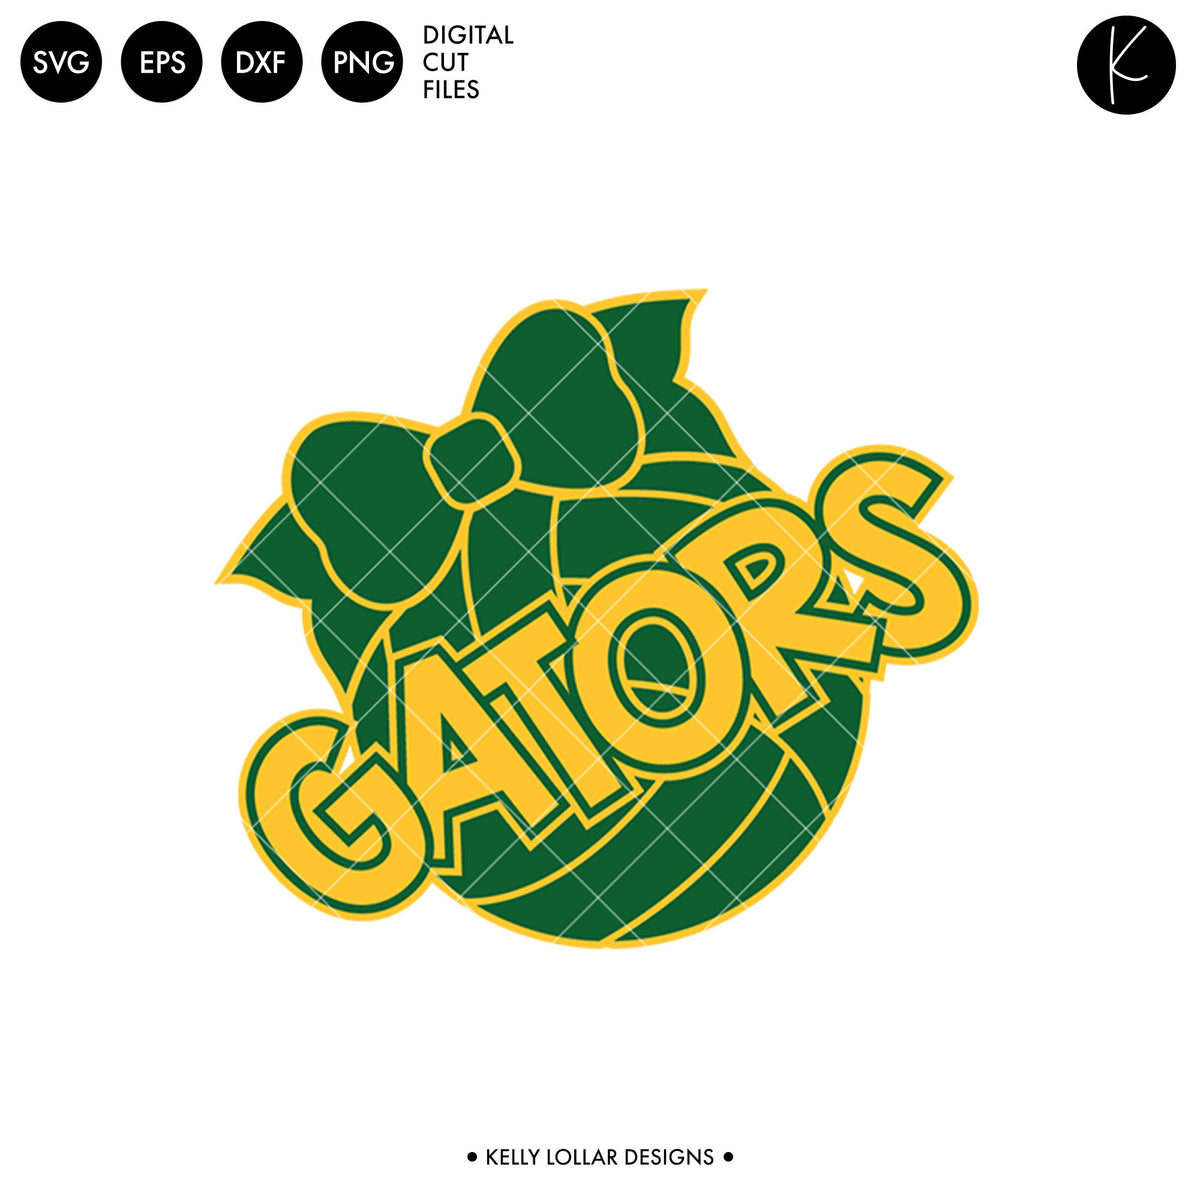 Gators Volleyball Bundle | SVG DXF EPS PNG Cut Files